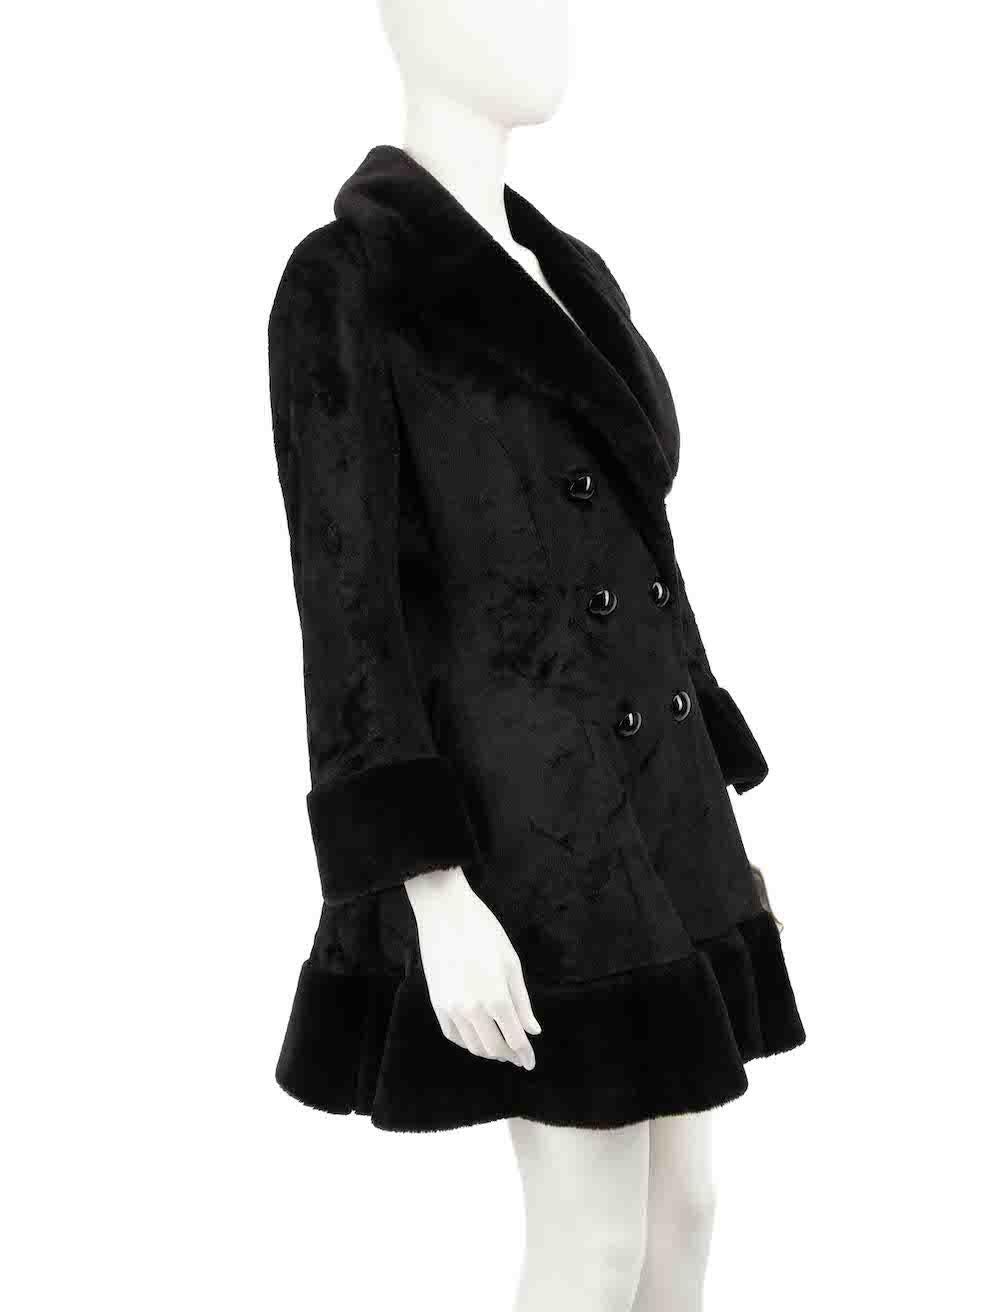 Condition is Very good. Hardly any visible wear to coat is evident on this used Moschino Couture! designer resale item.
 
 
 
 Details
 
 
 Black
 
 Faux fur
 
 Coat
 
 Mid length
 
 Double breasted
 
 2x Front side pockets
 
 
 
 
 
 Made in Italy
